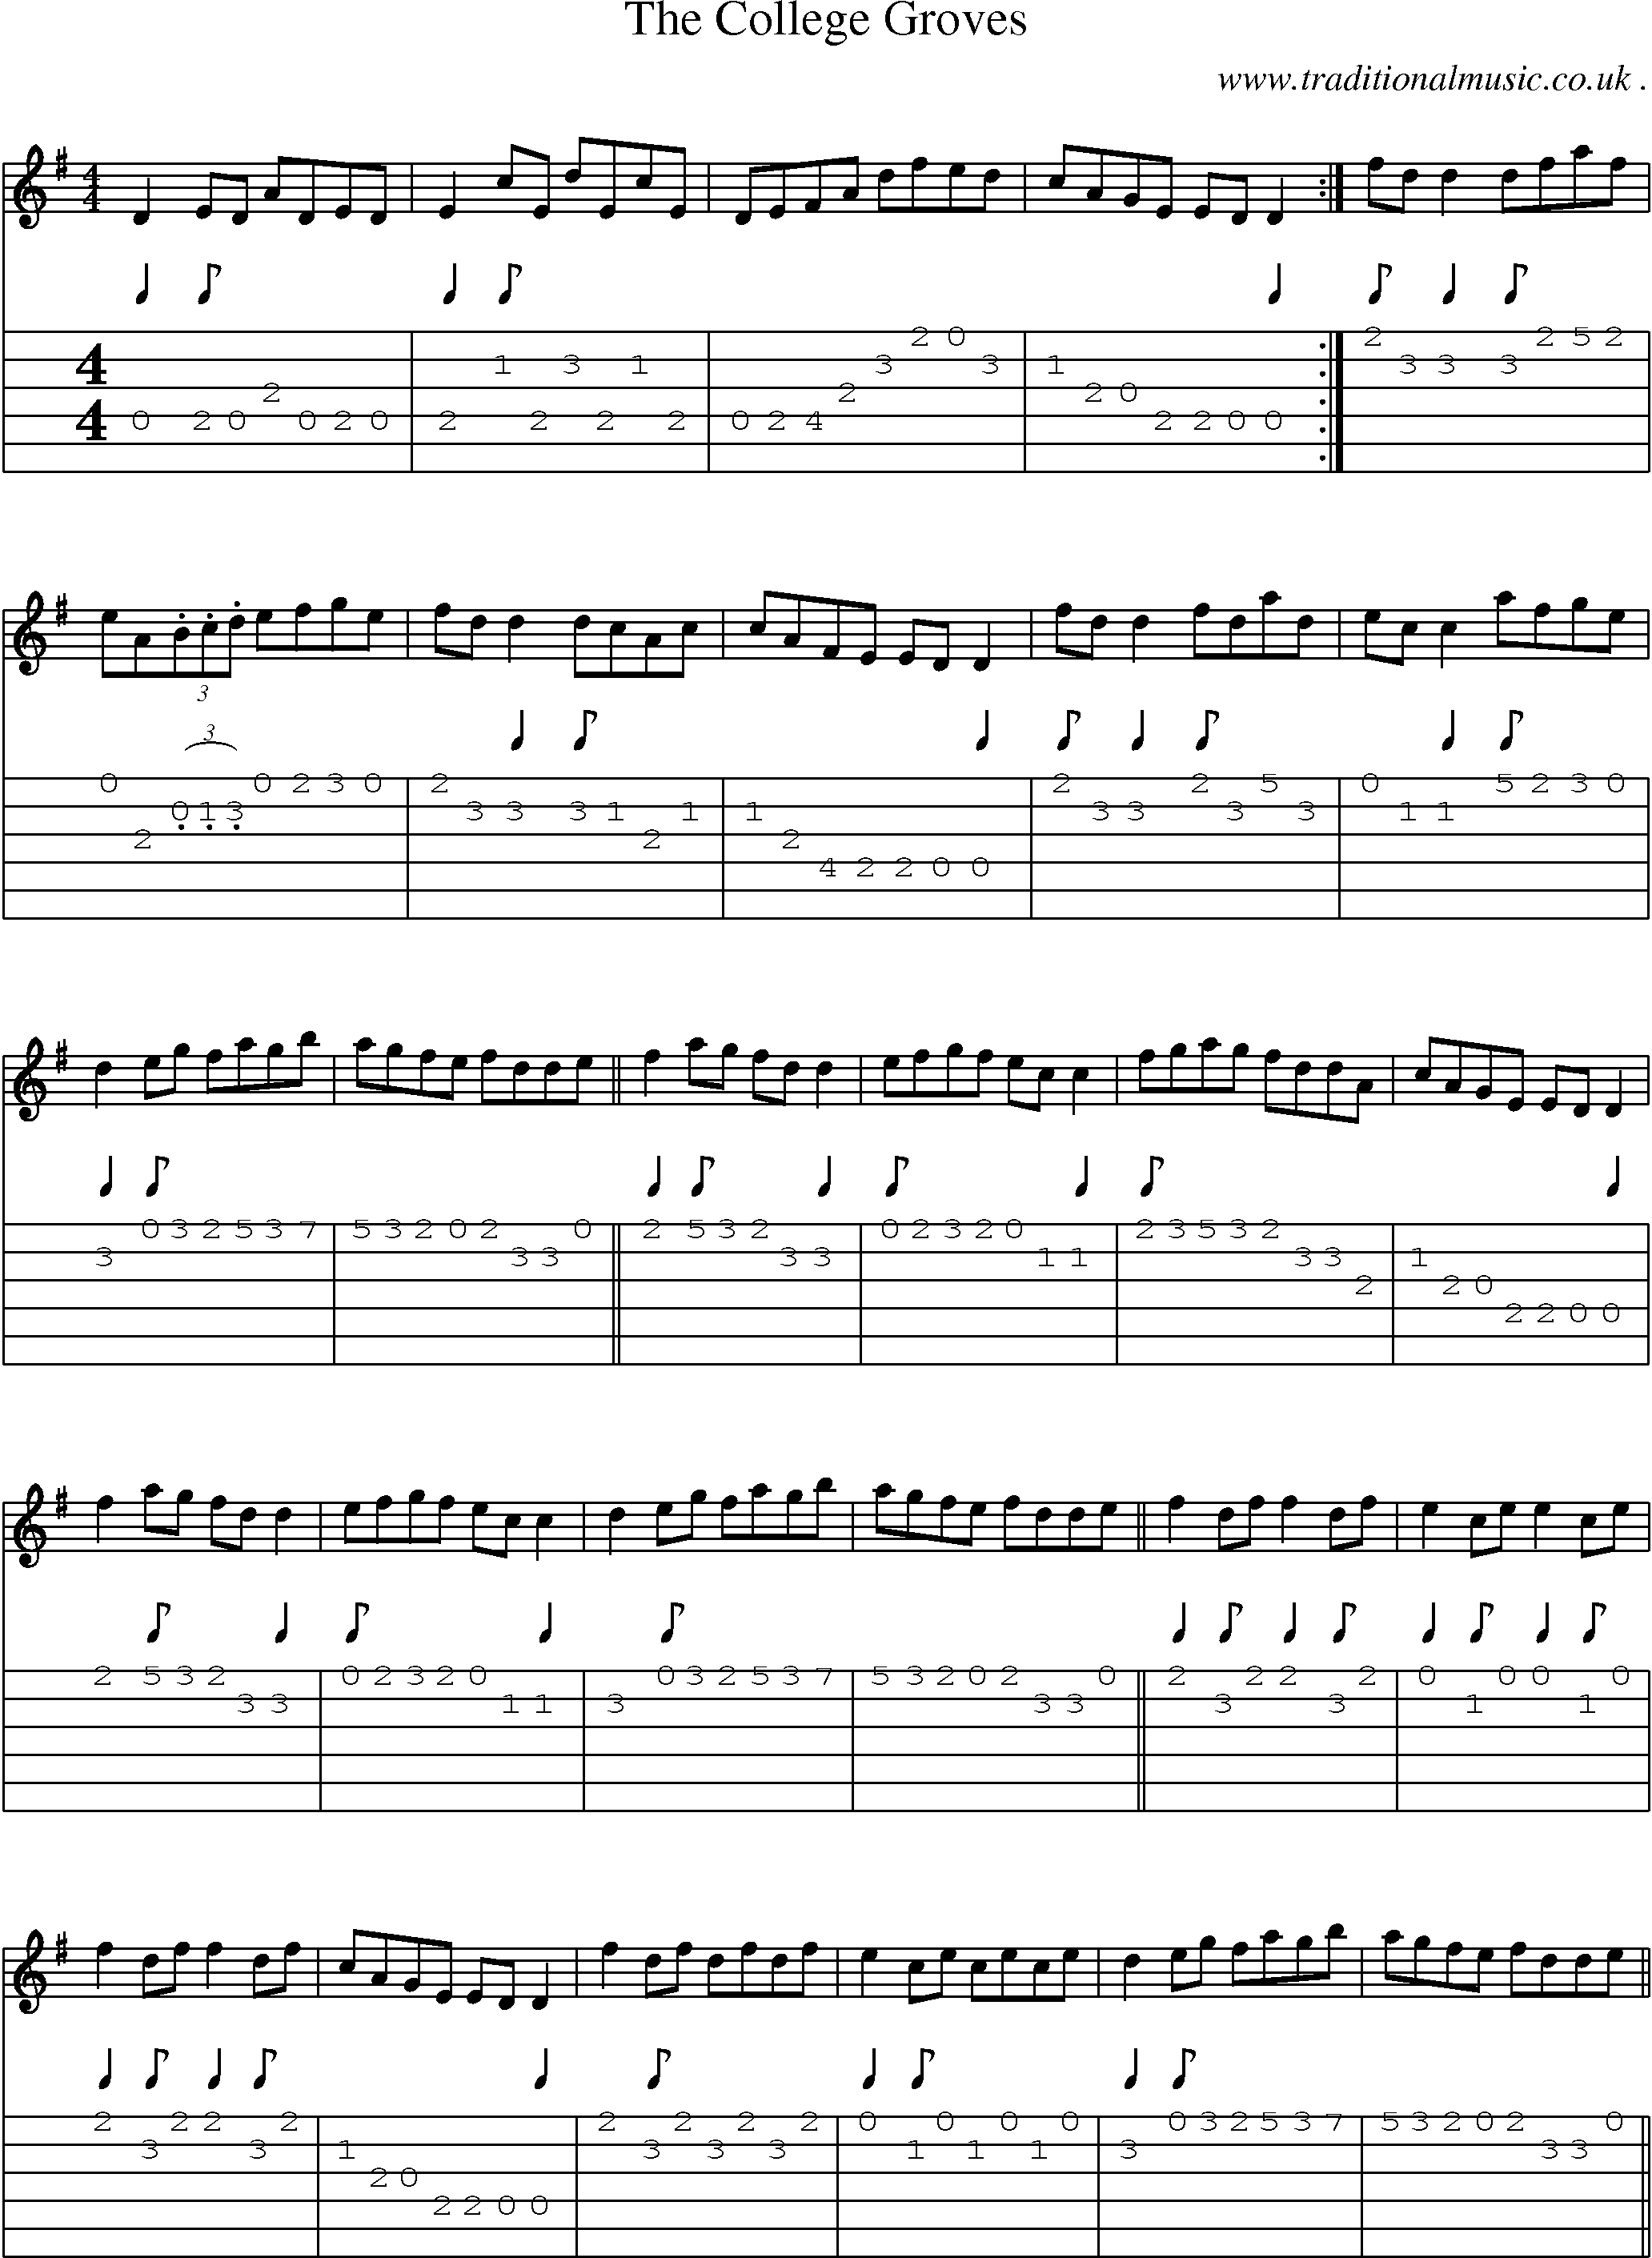 Sheet-Music and Guitar Tabs for The College Groves